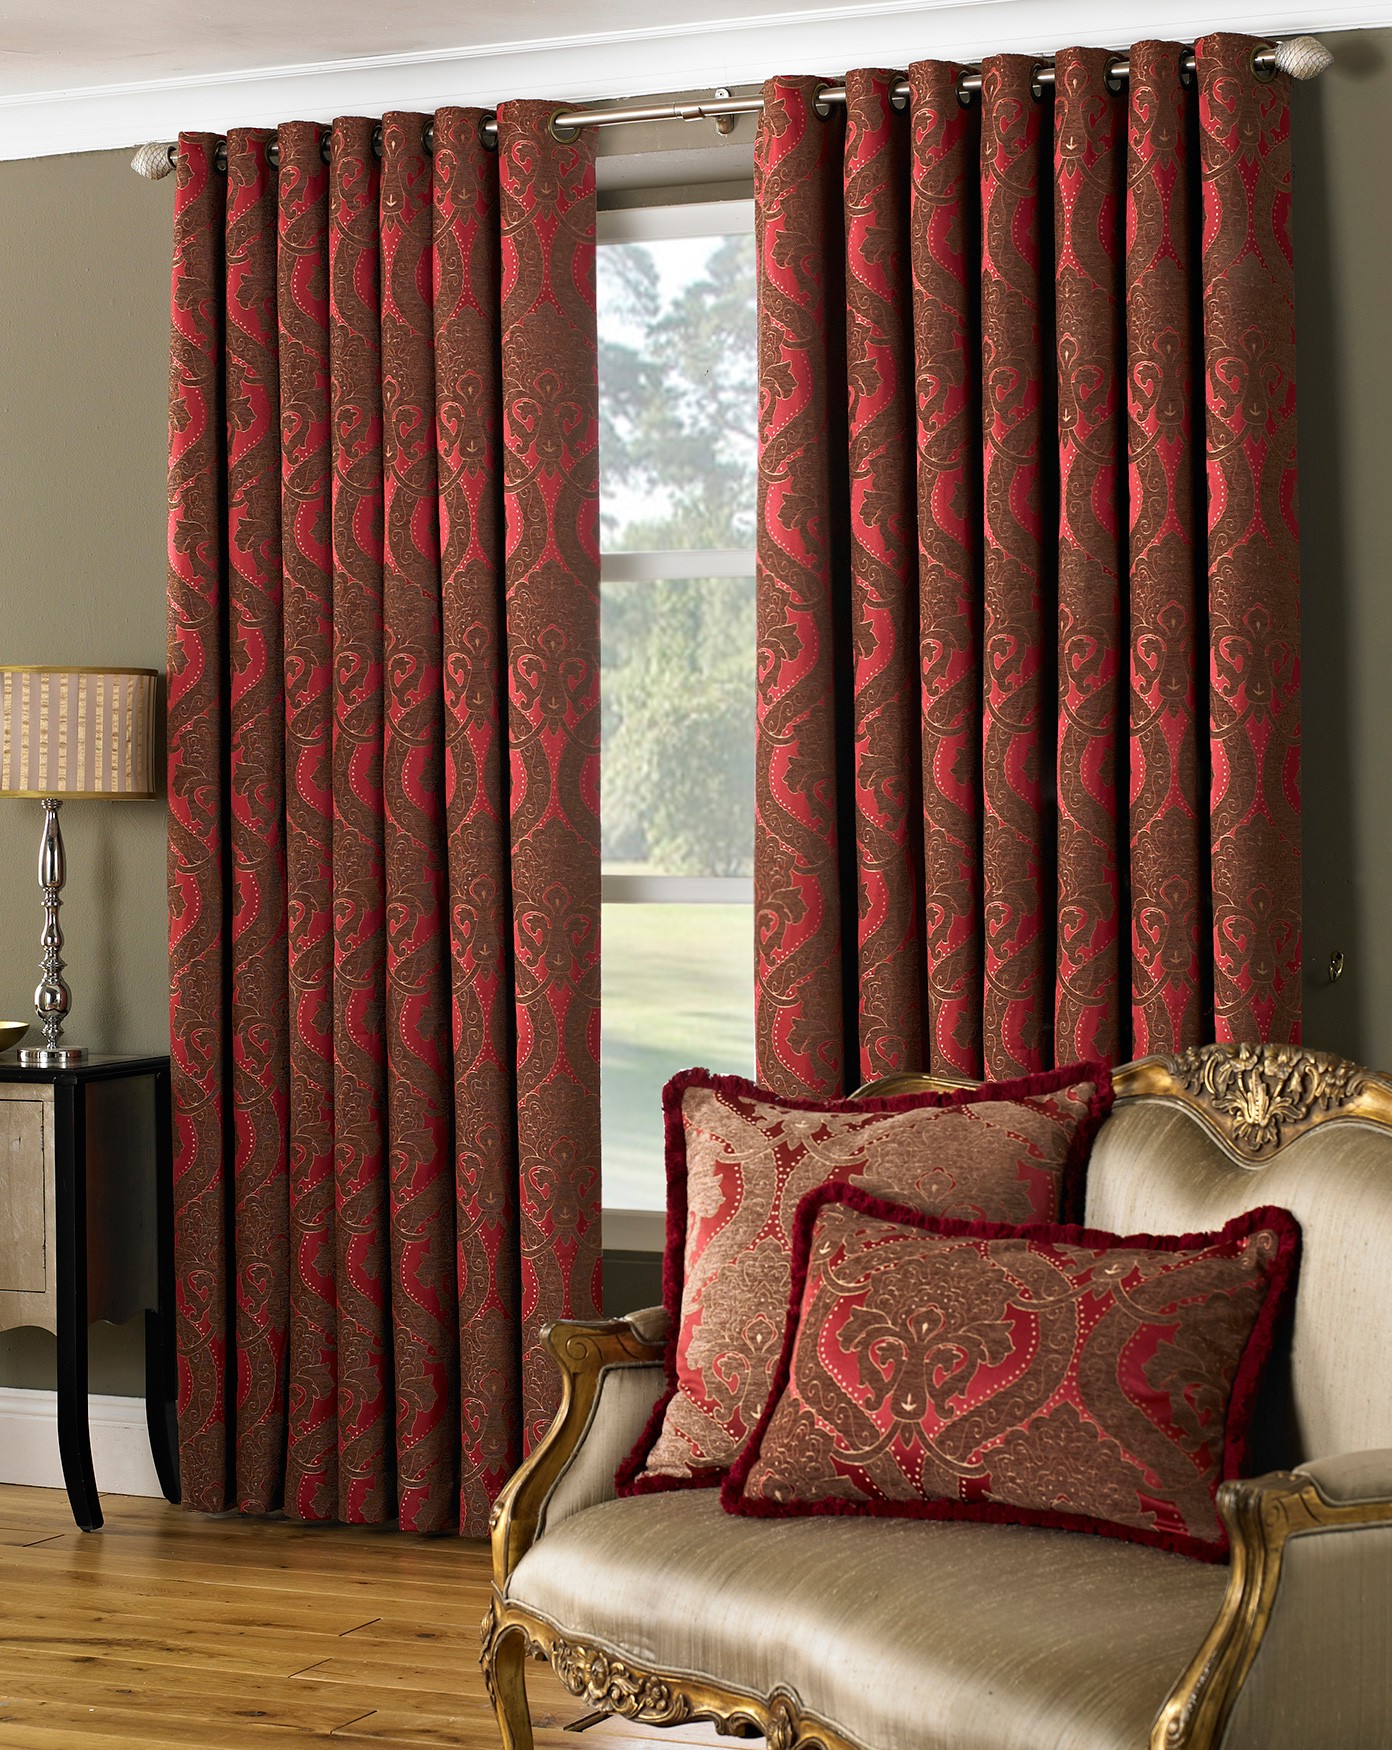 Amazing Good Living Room Curtain Color Ideas Vermont 4 Home Decorations